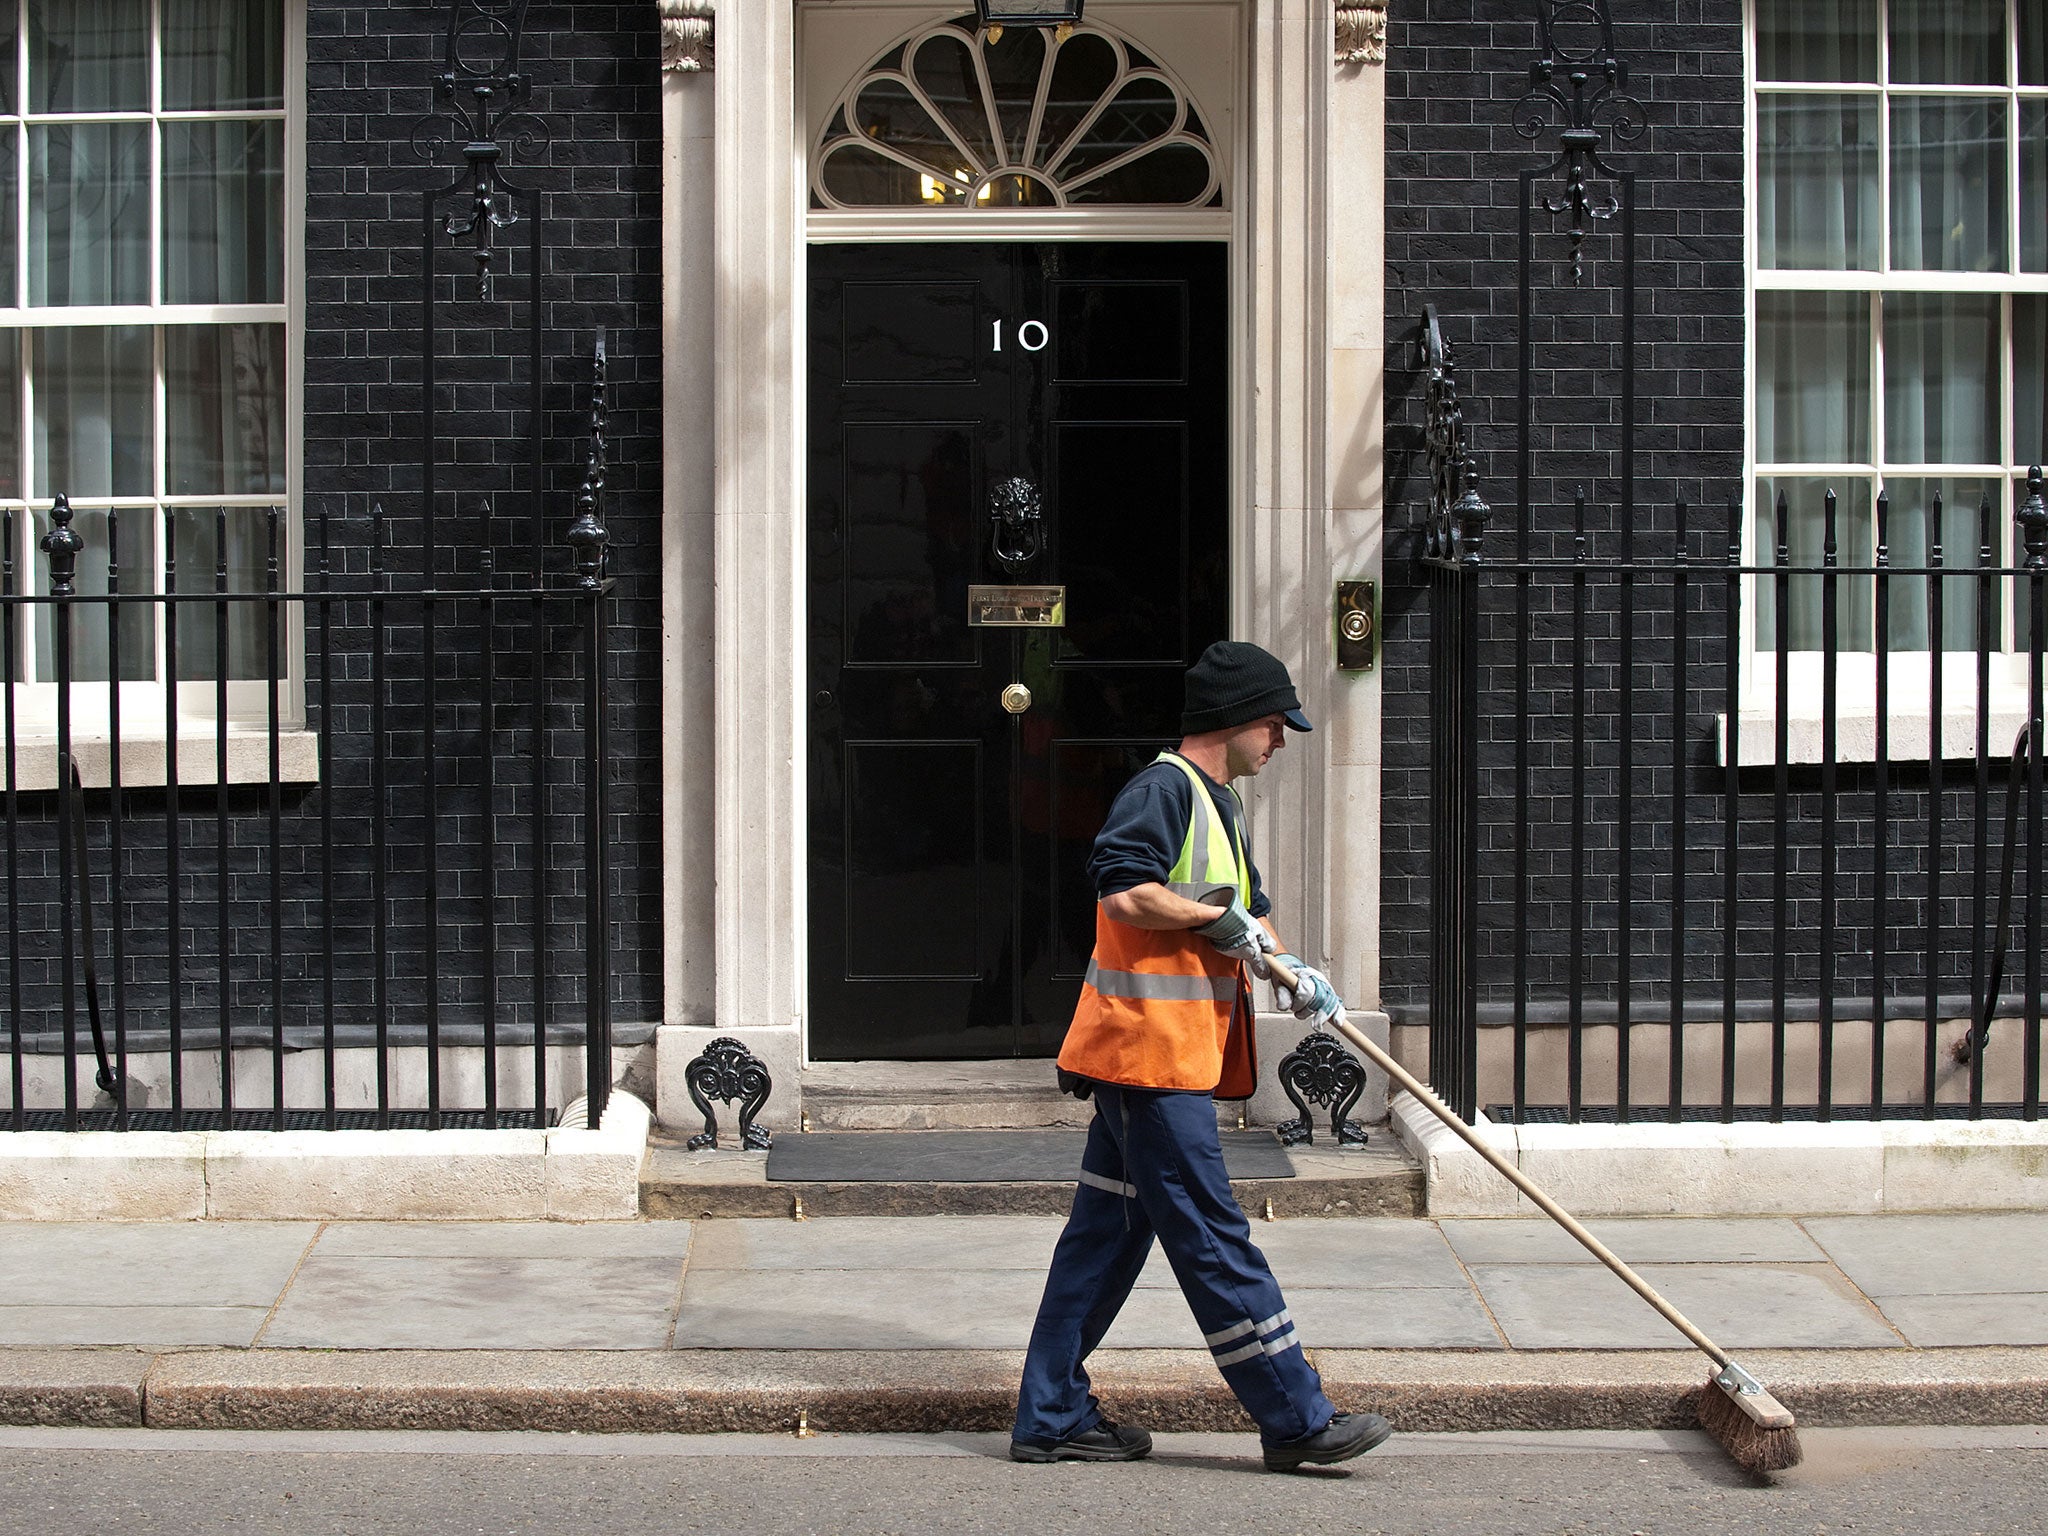 A street cleaner passes the front door of 10 Downing Street in London, on May 5, 2010, on the eve of a general election in Britain.